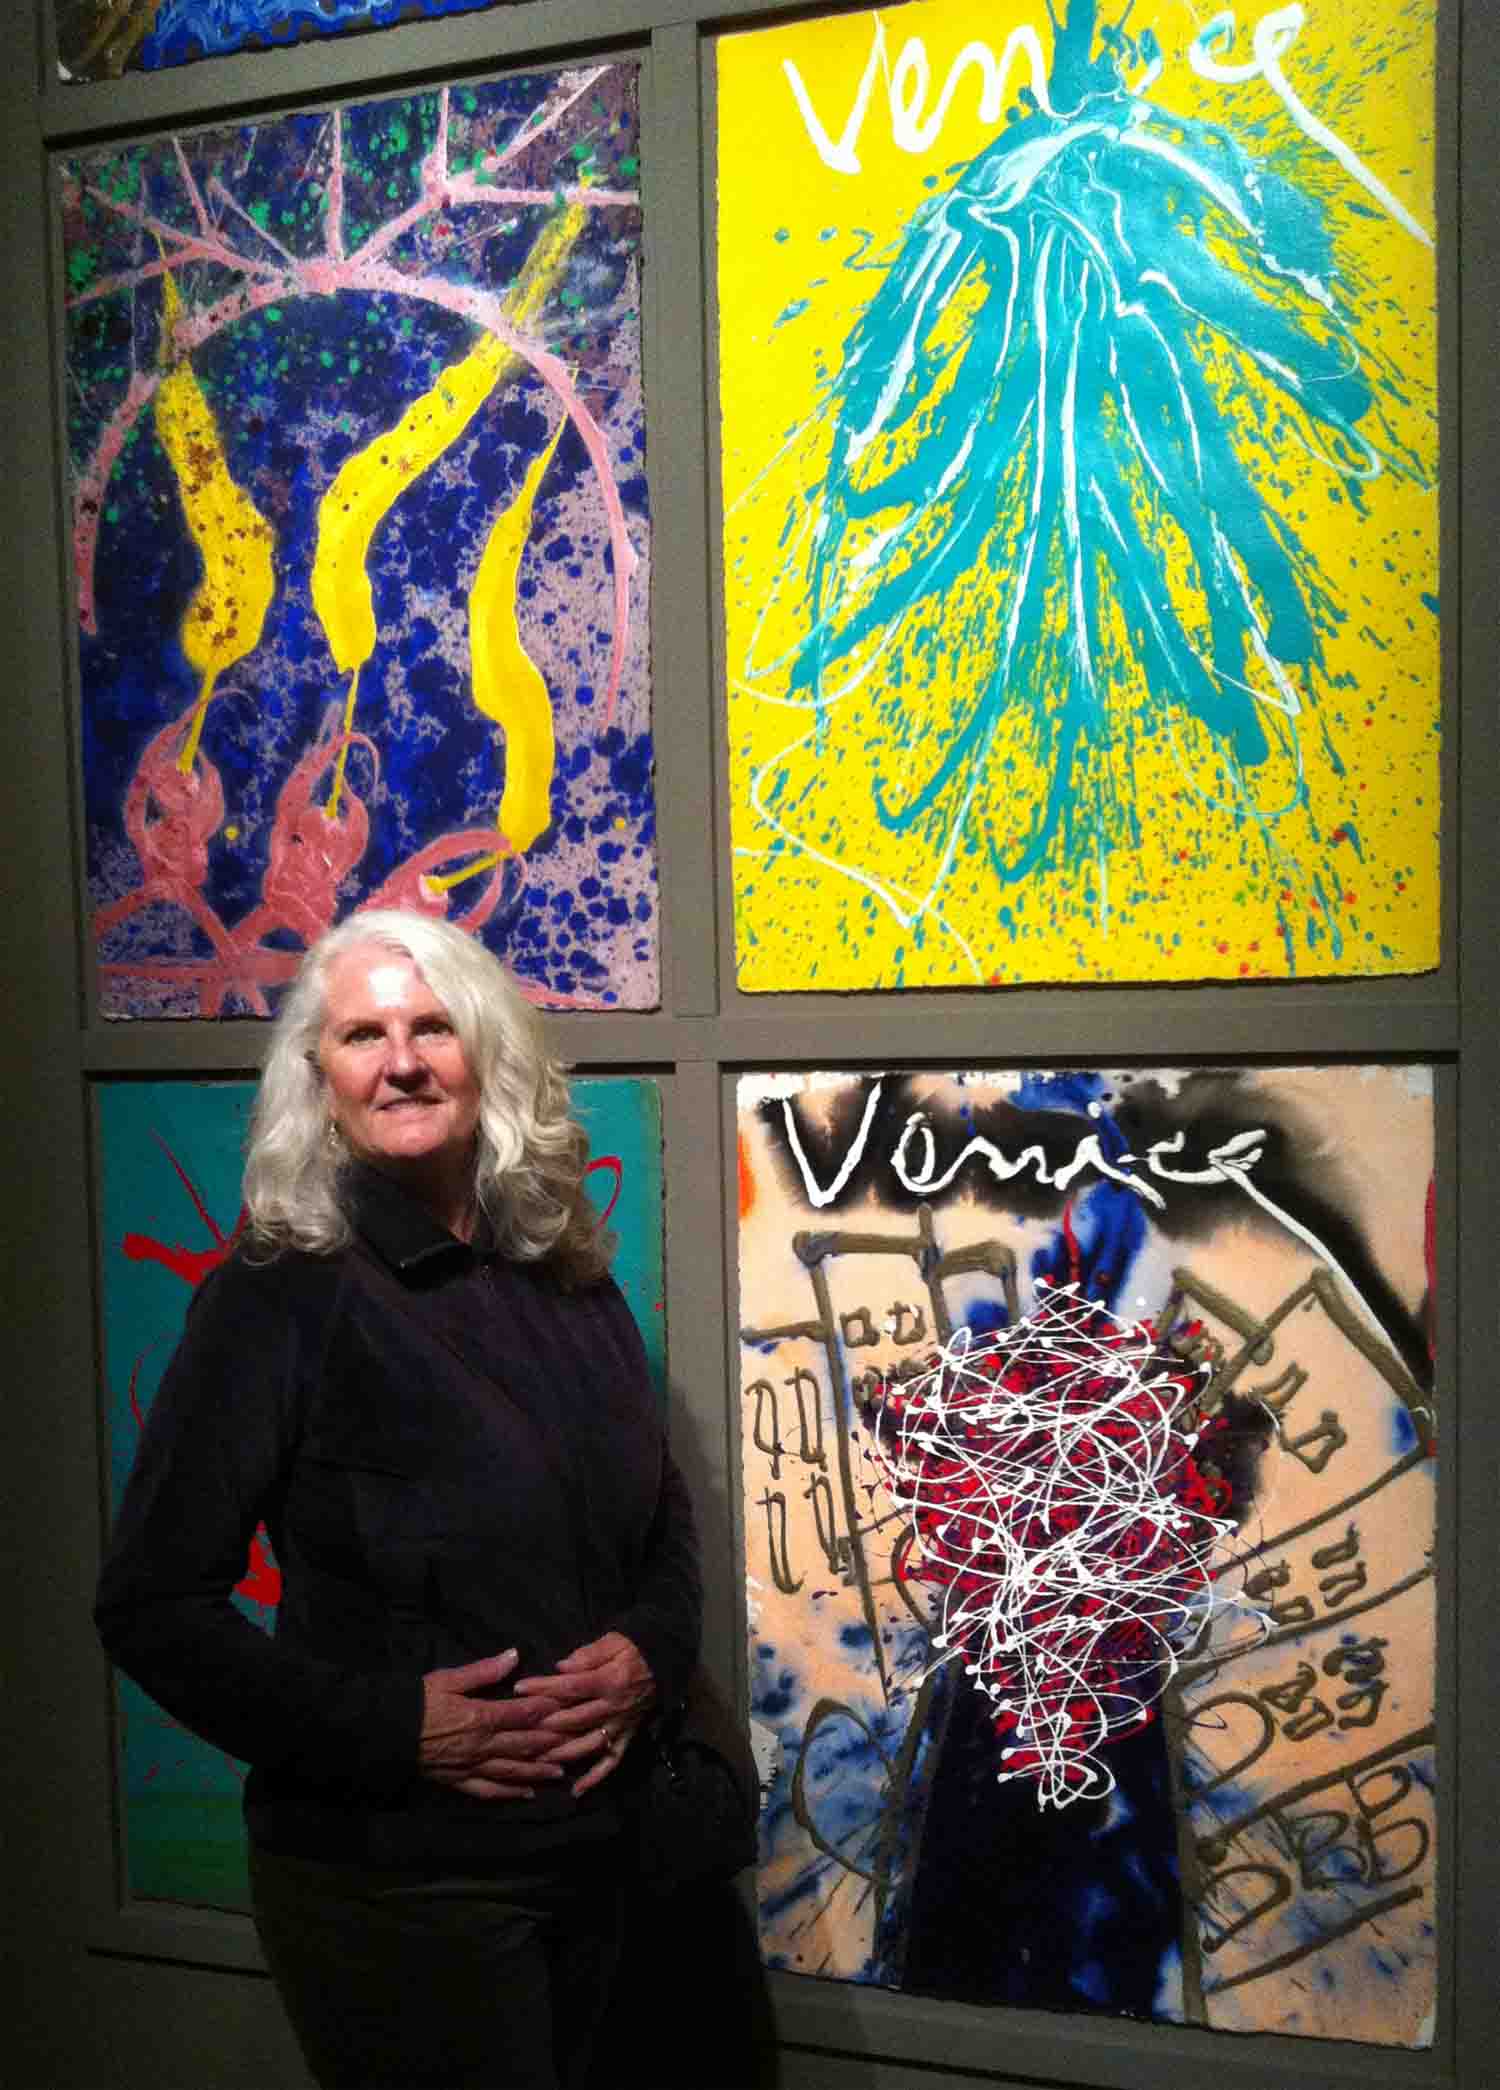 Jill in front of Chihuly drawings copy.jpg